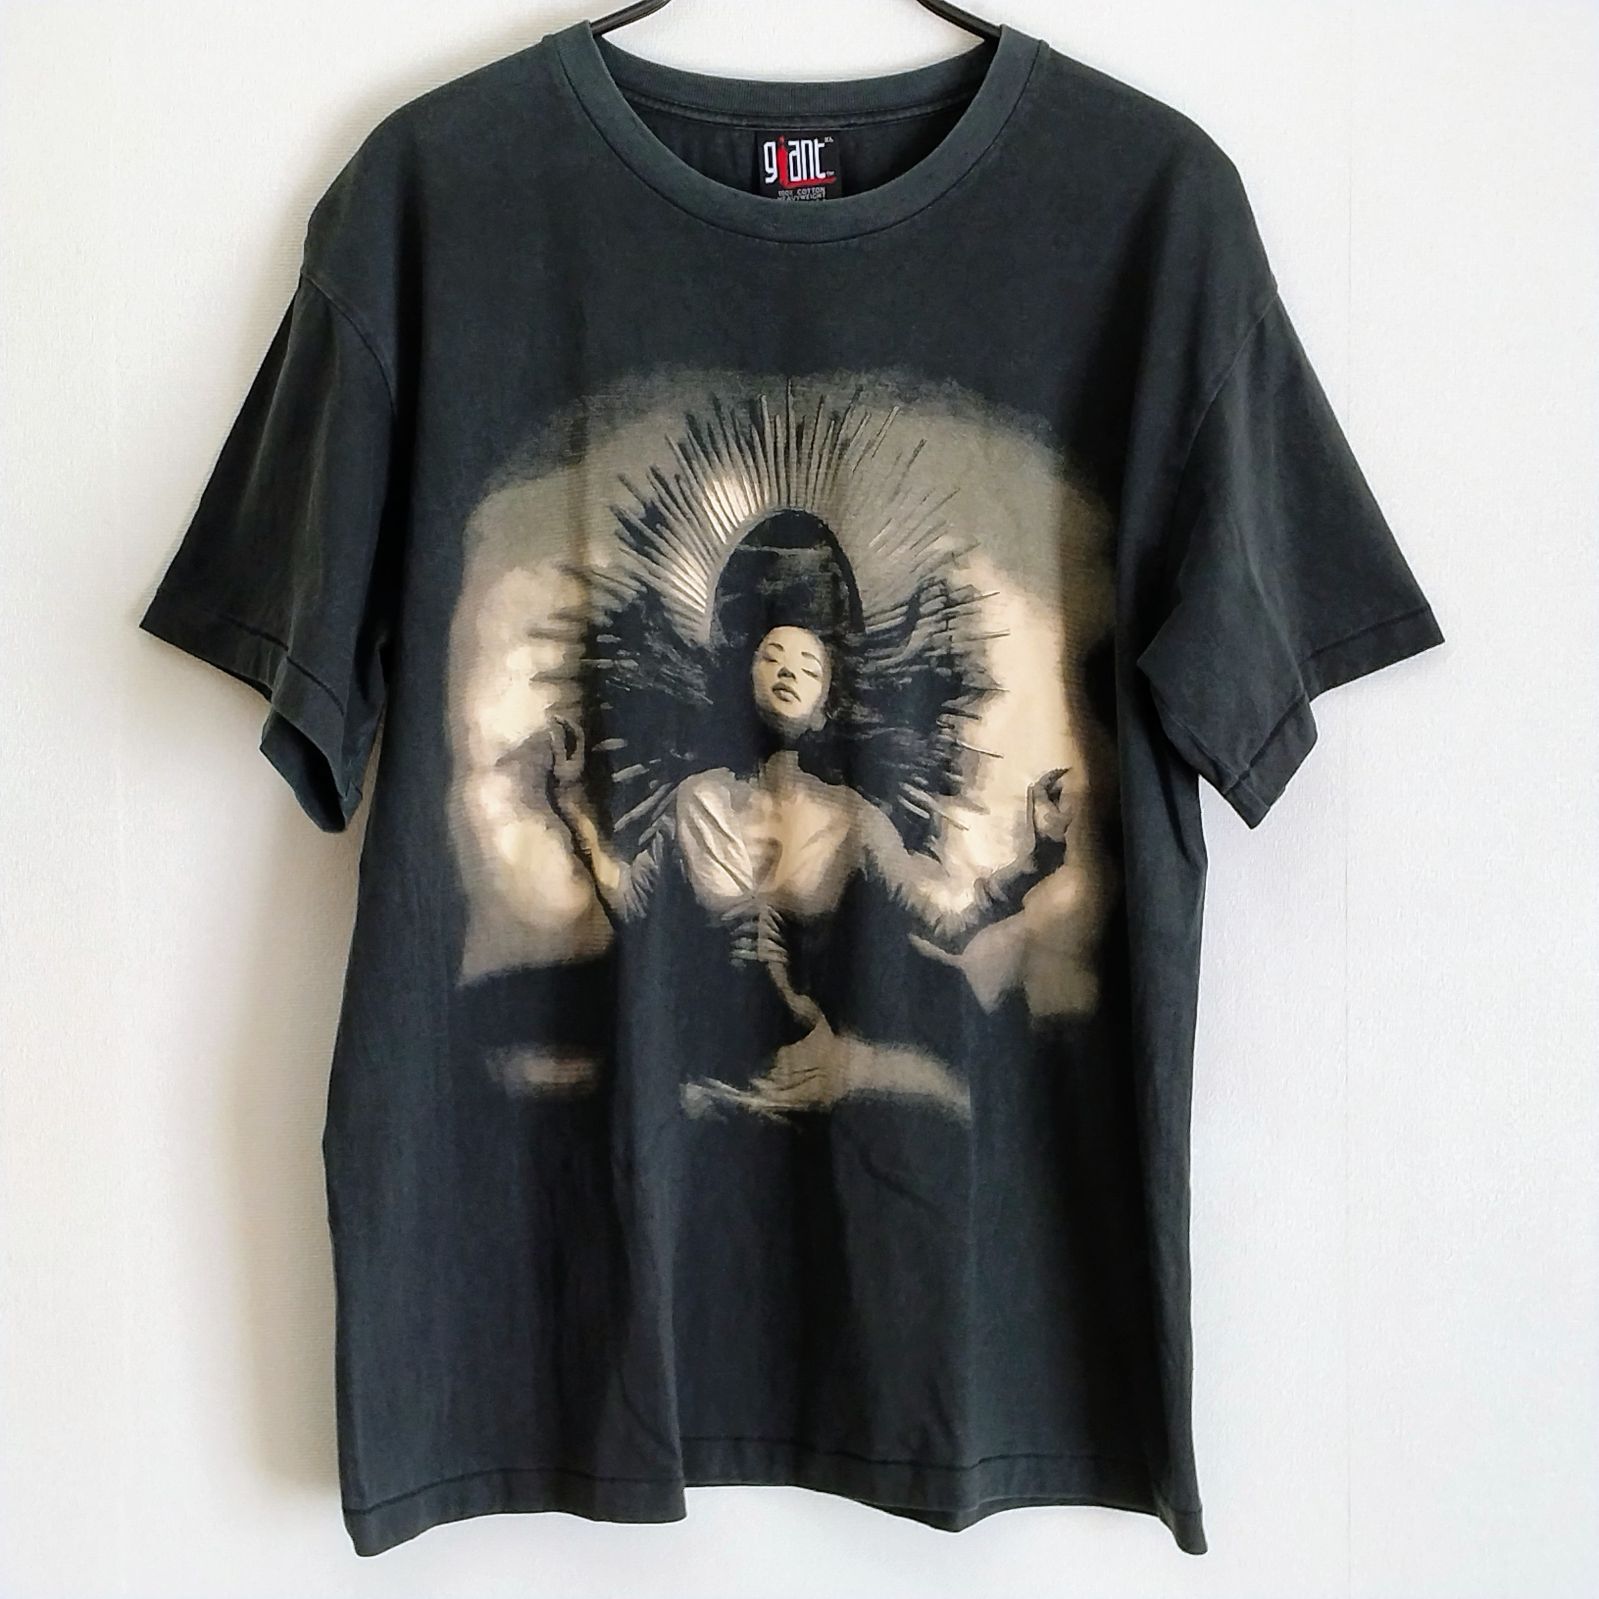 Sade SUMMER DELUXE Tシャツ Kanye West着用 シャーデー サマー 